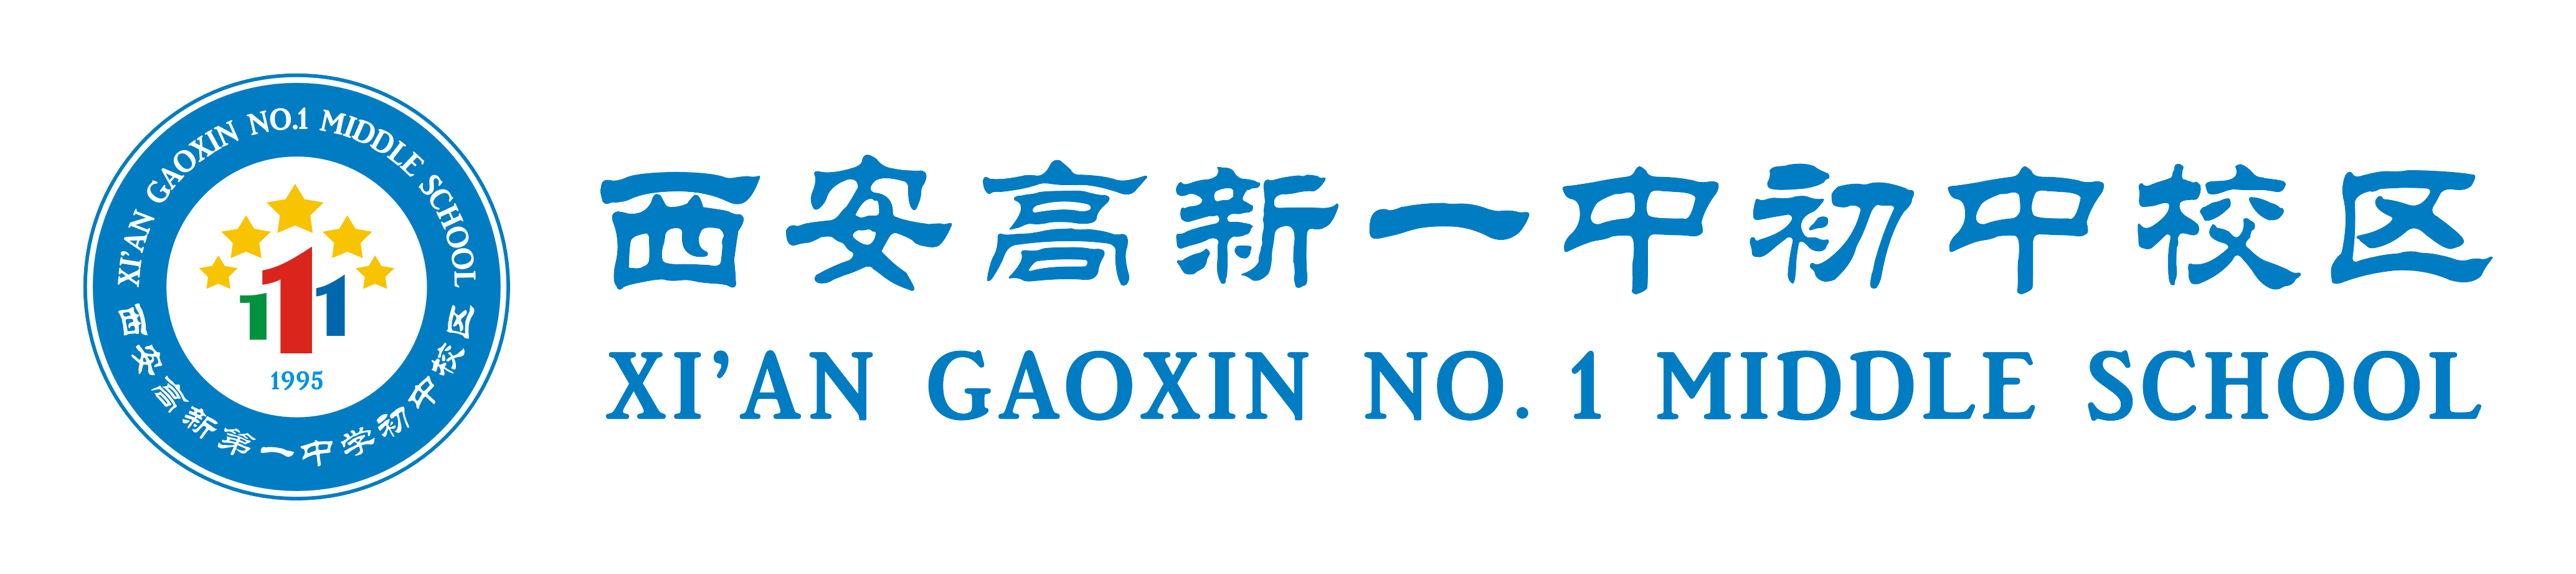 Xi'an Gaoxin Number 1 Middle School - banner